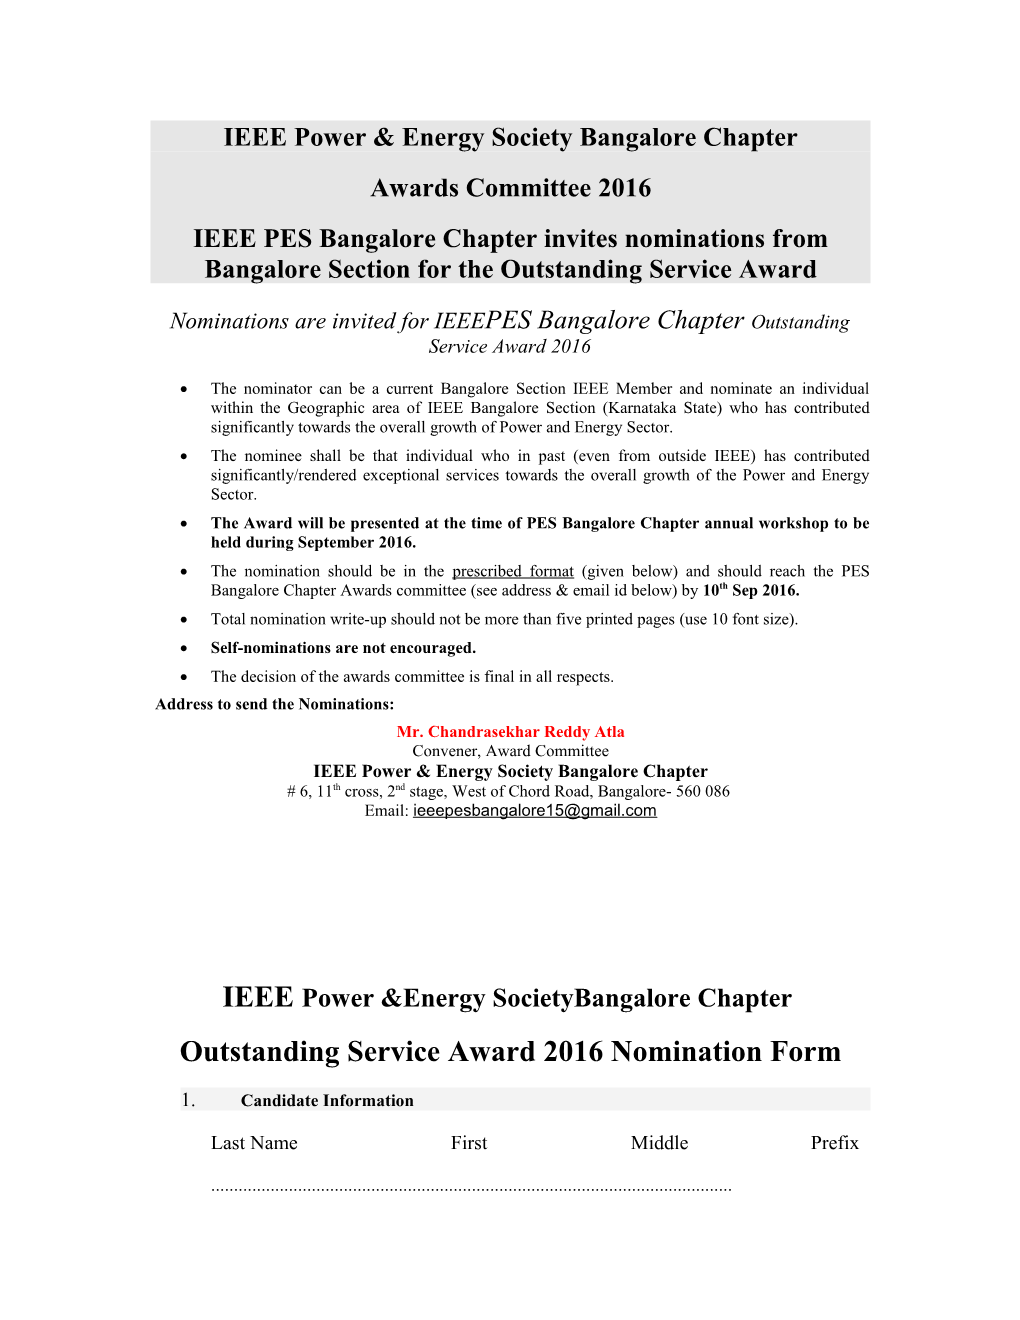 Call for Nominations for Outstanding Service Award